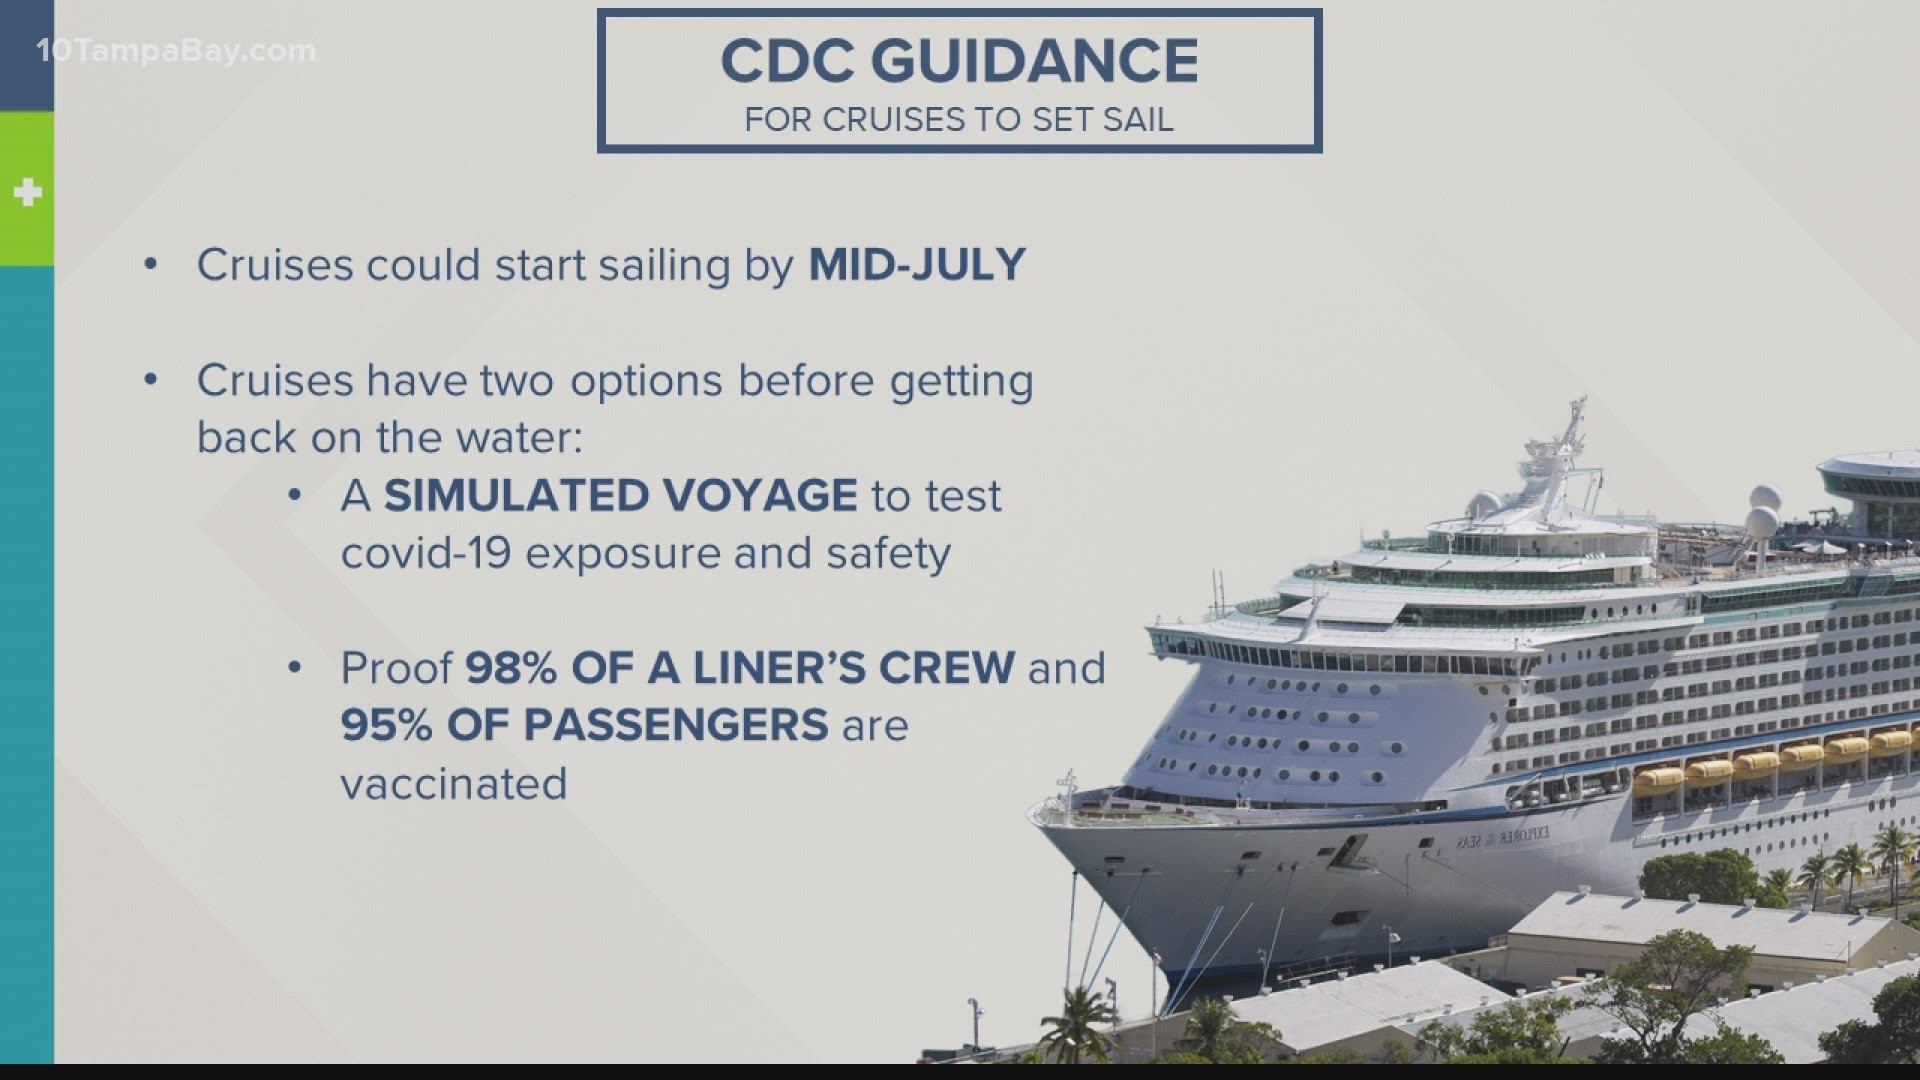 Pandemic restrictions on Florida-based cruise ships will remain in place after a federal appeals court temporarily blocked a previous ruling.